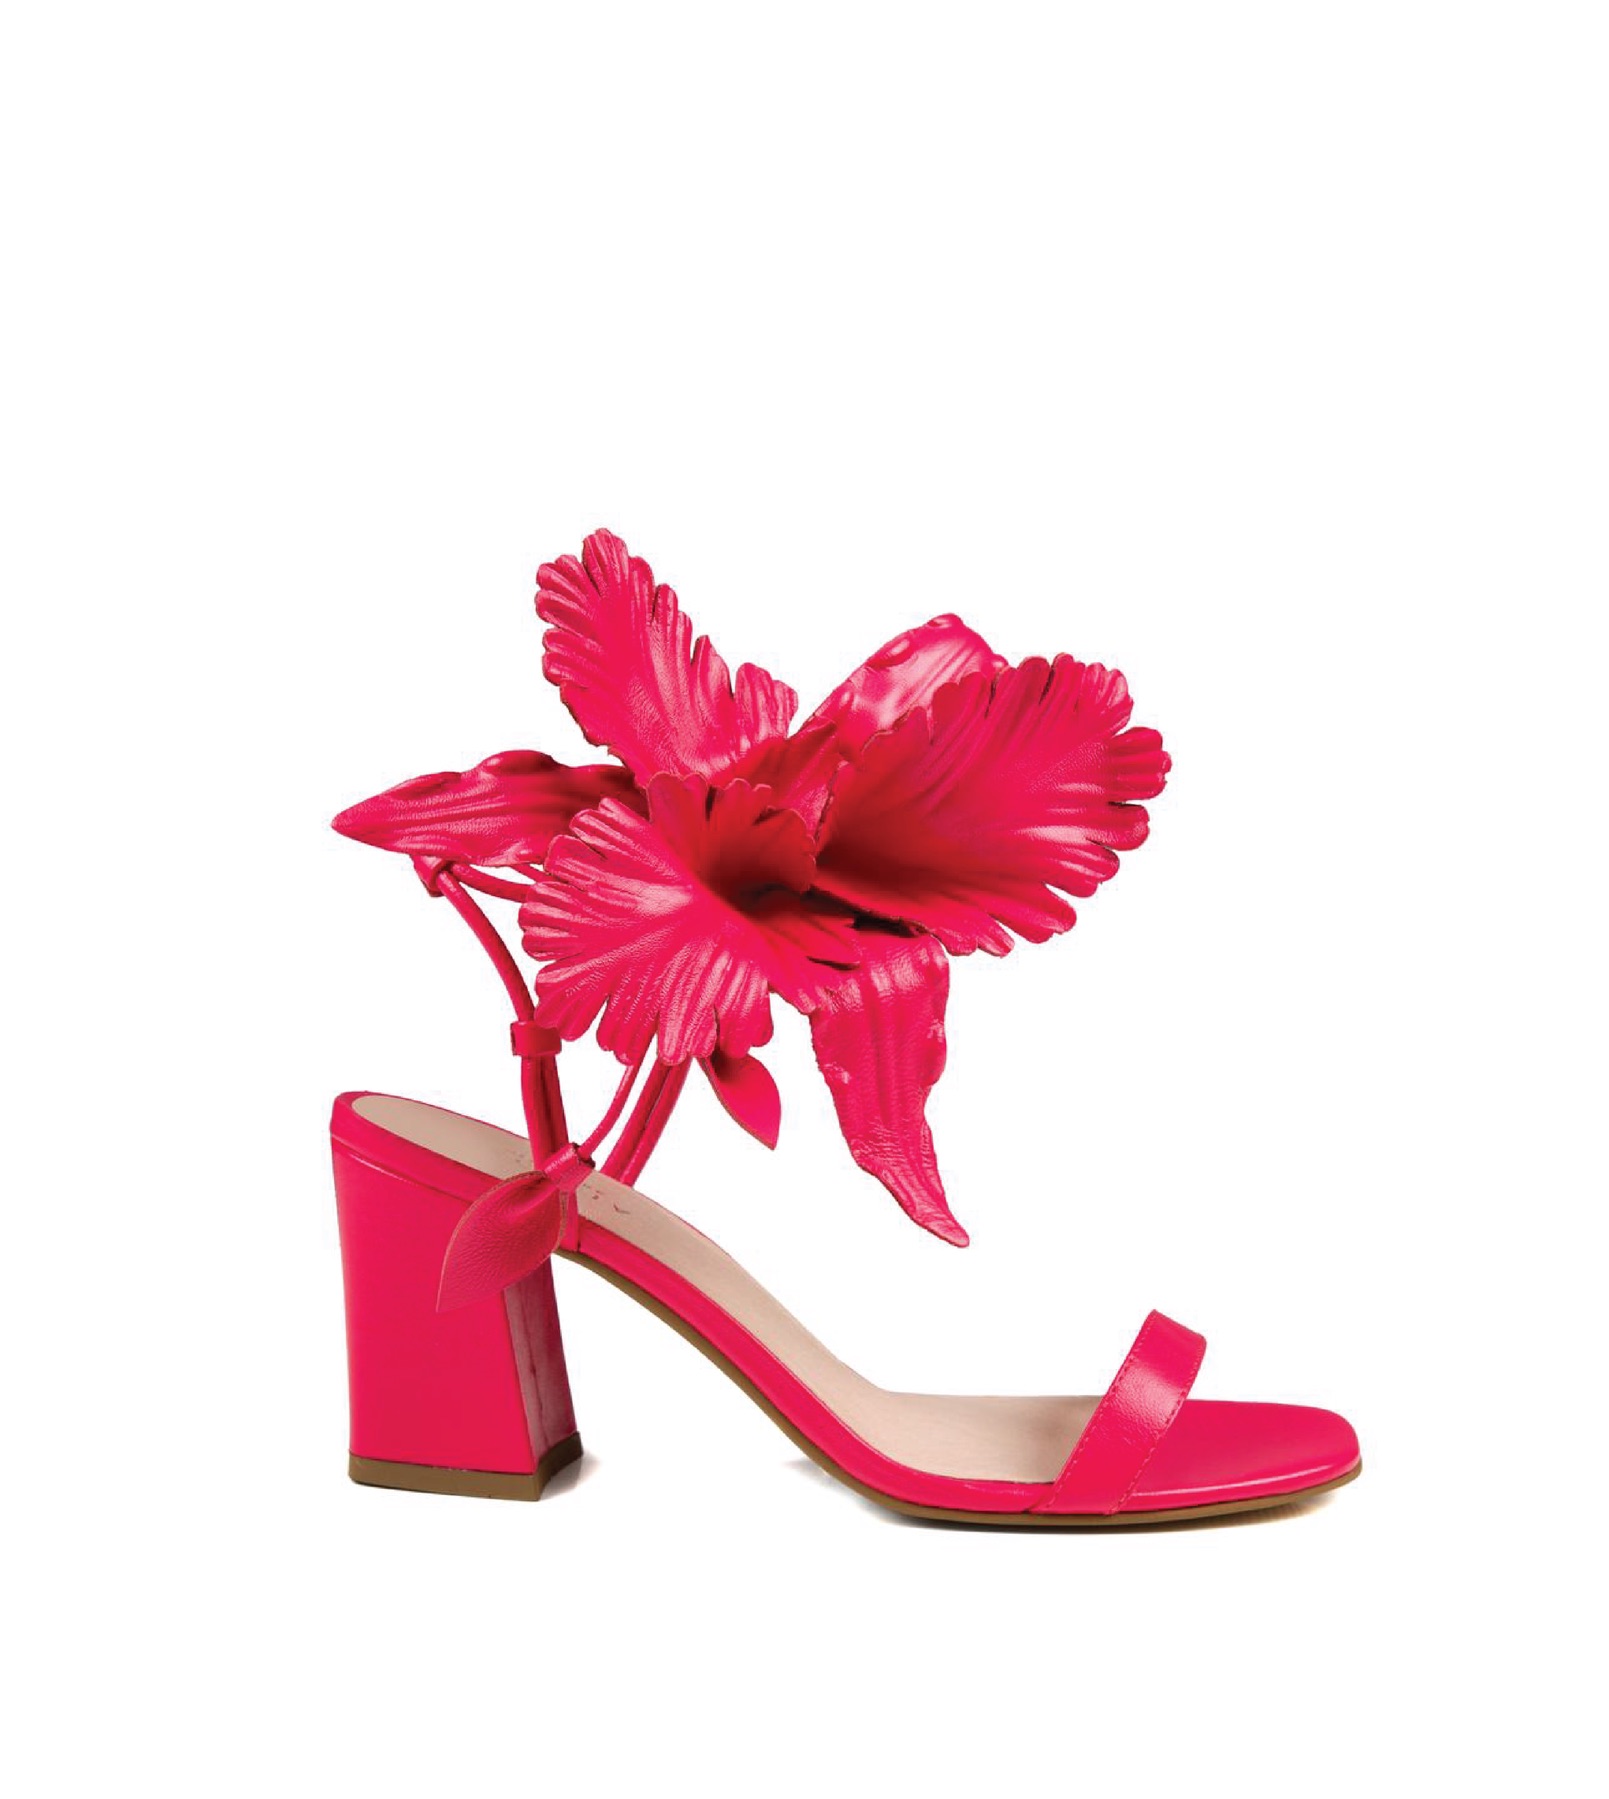 Bright red platform heels with a large red flower